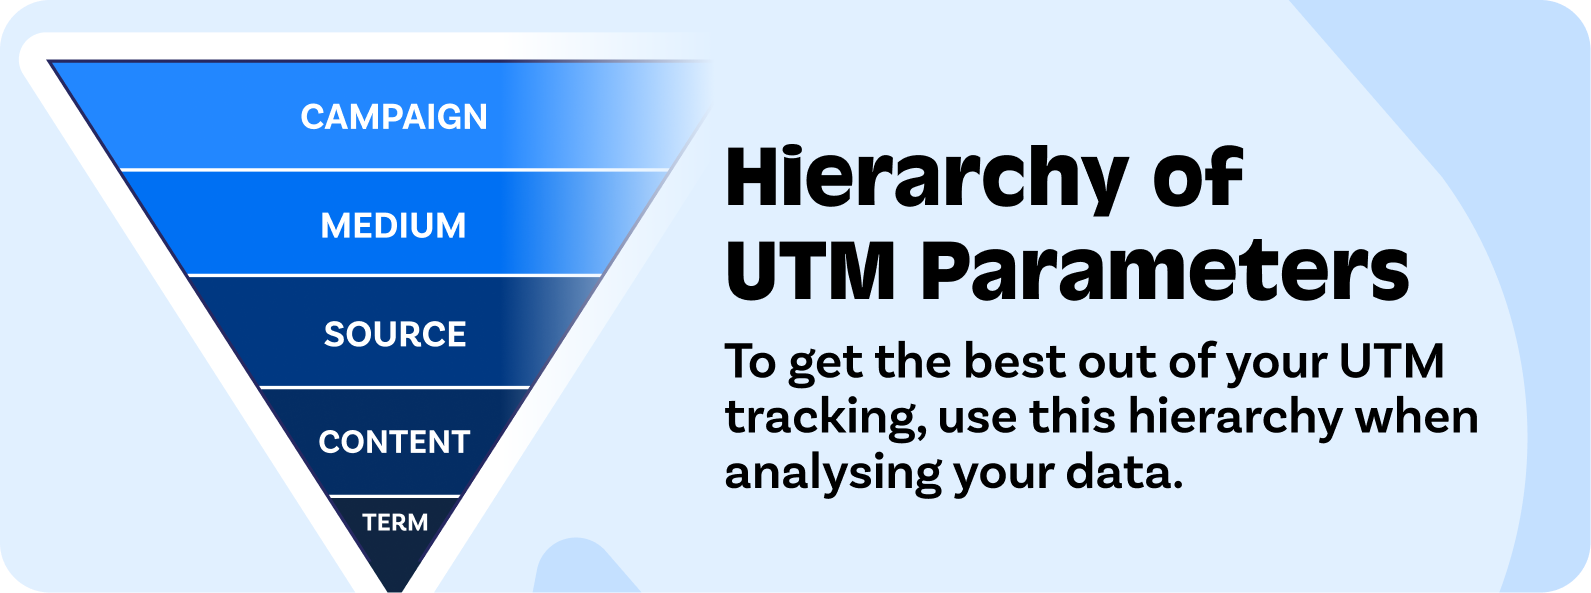 UTM hierarchy of parameters.